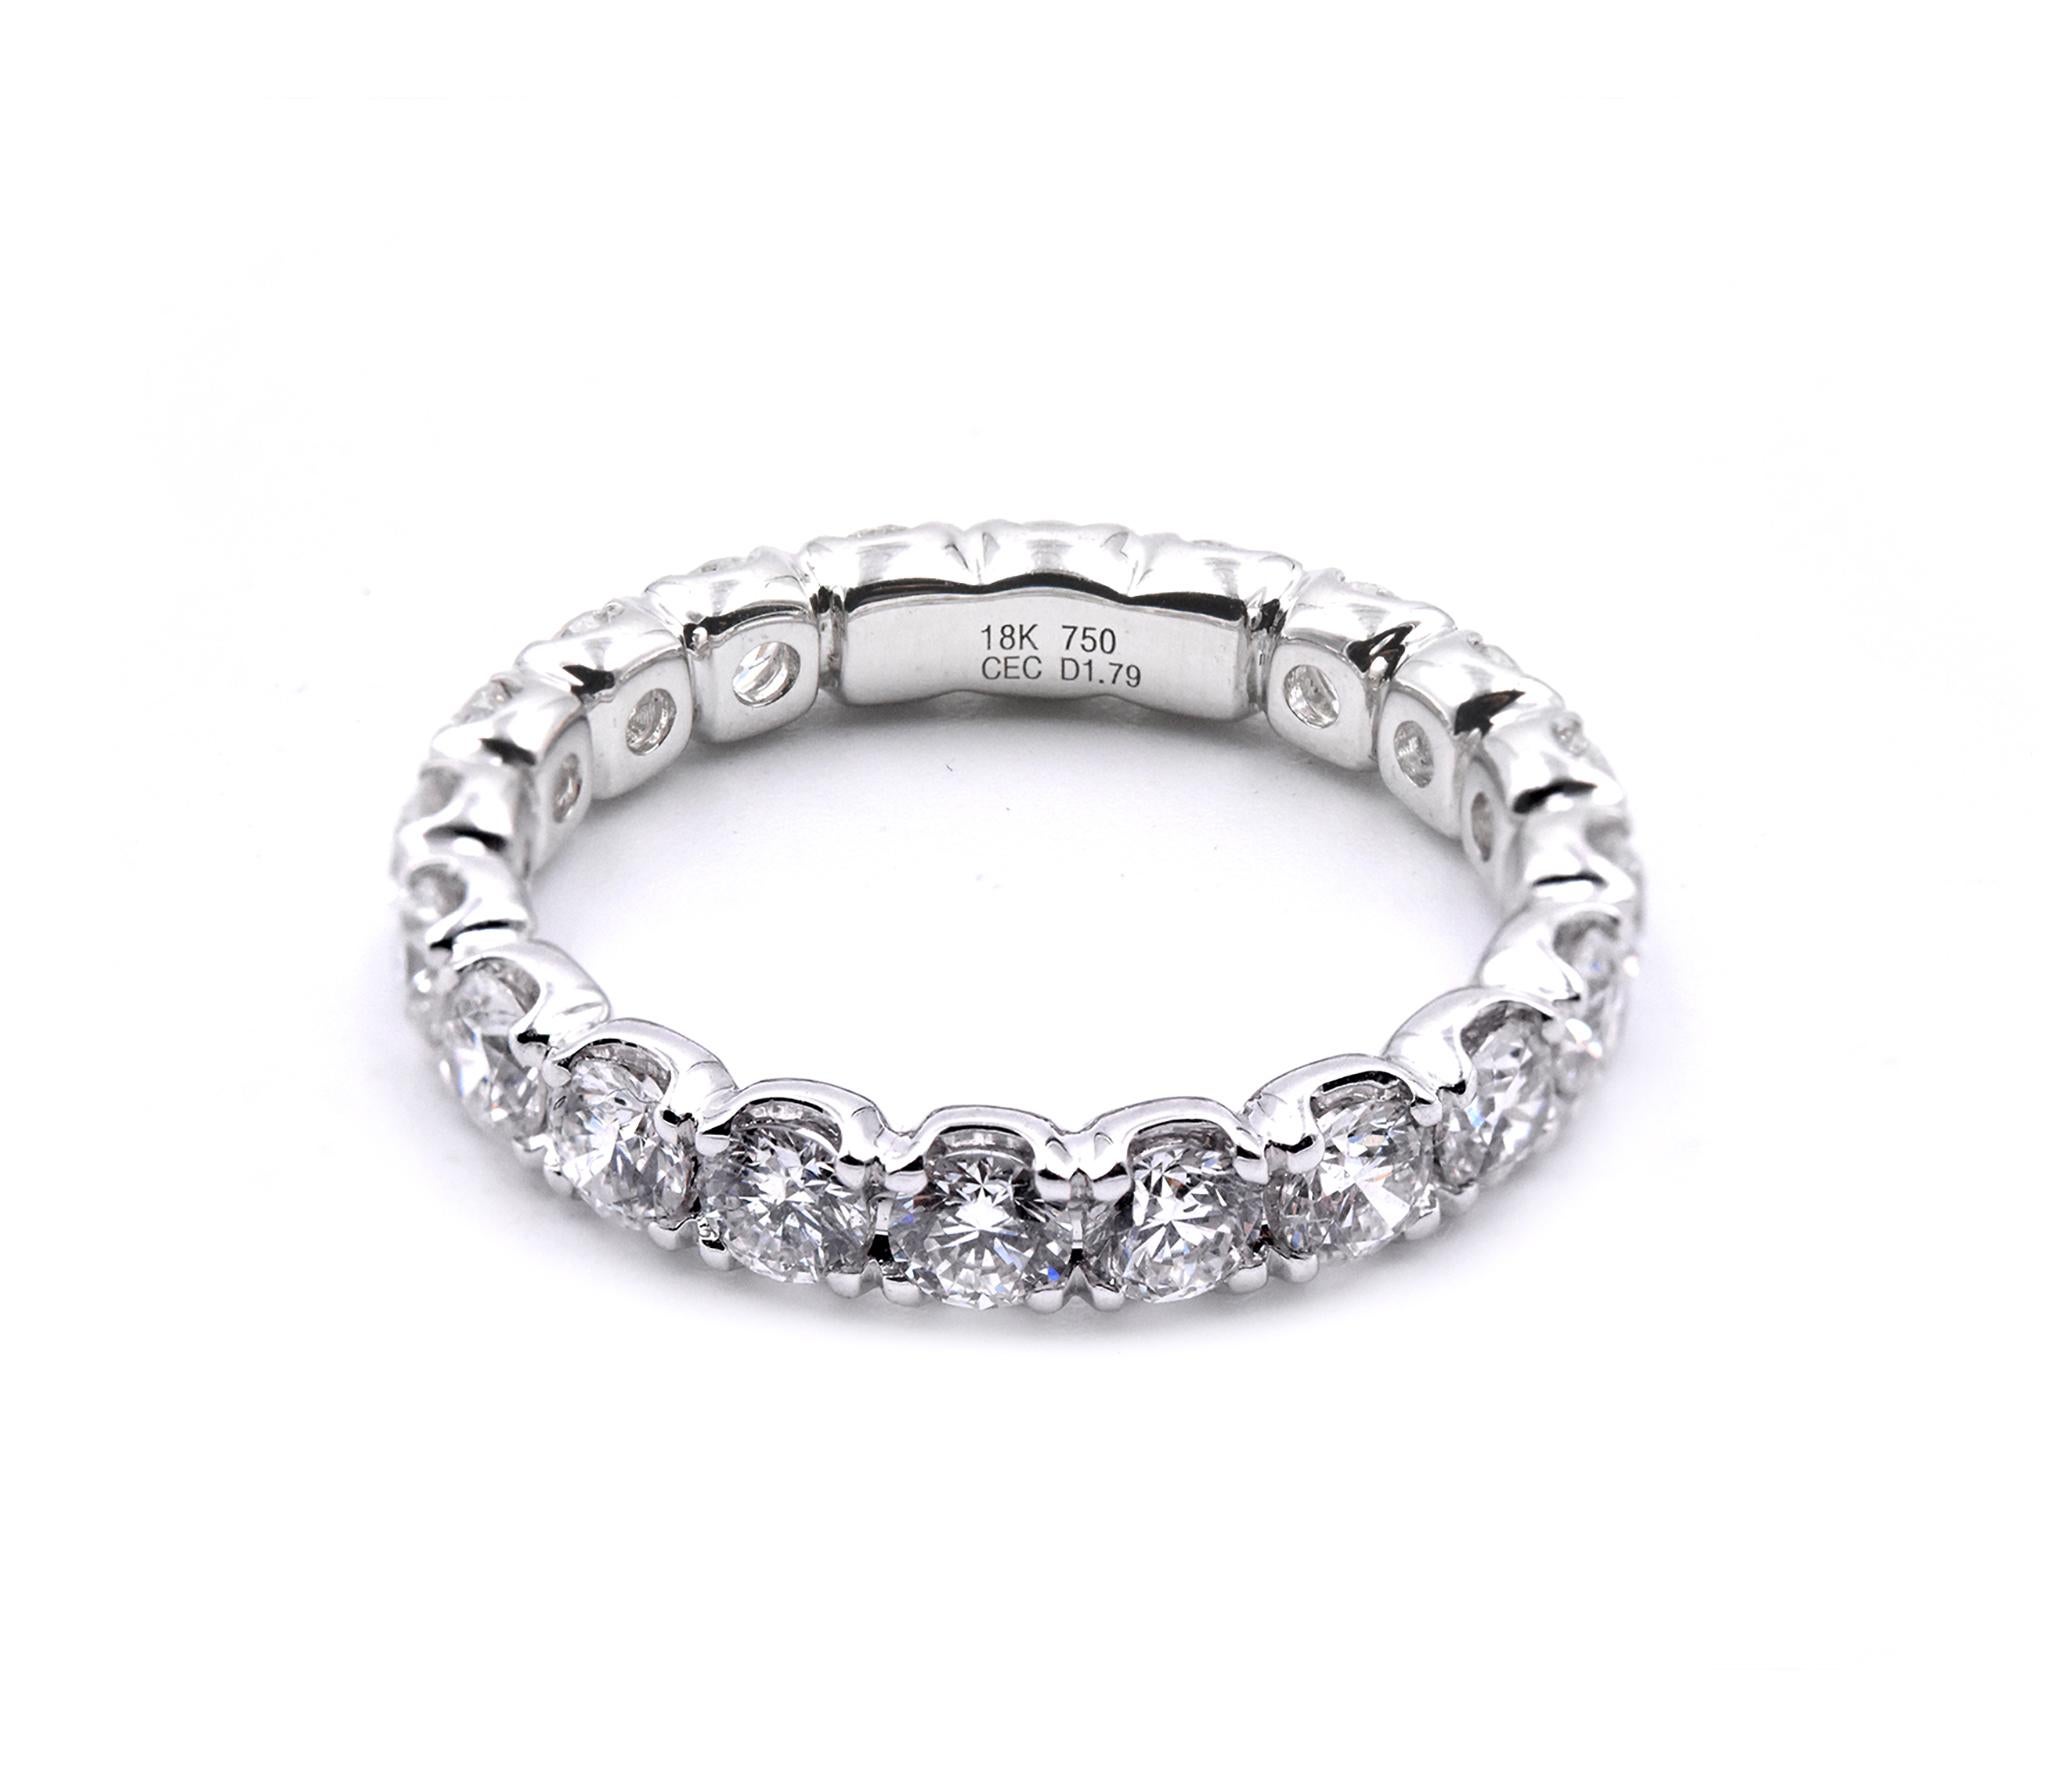 Material: 18k white gold
Diamonds: 20 round brilliant cut= 1.79cttw
Color: G
Clarity: VS
Ring Size: 5.75
Dimensions: ring is 3.33mm wide
Weight: 2.85 grams
